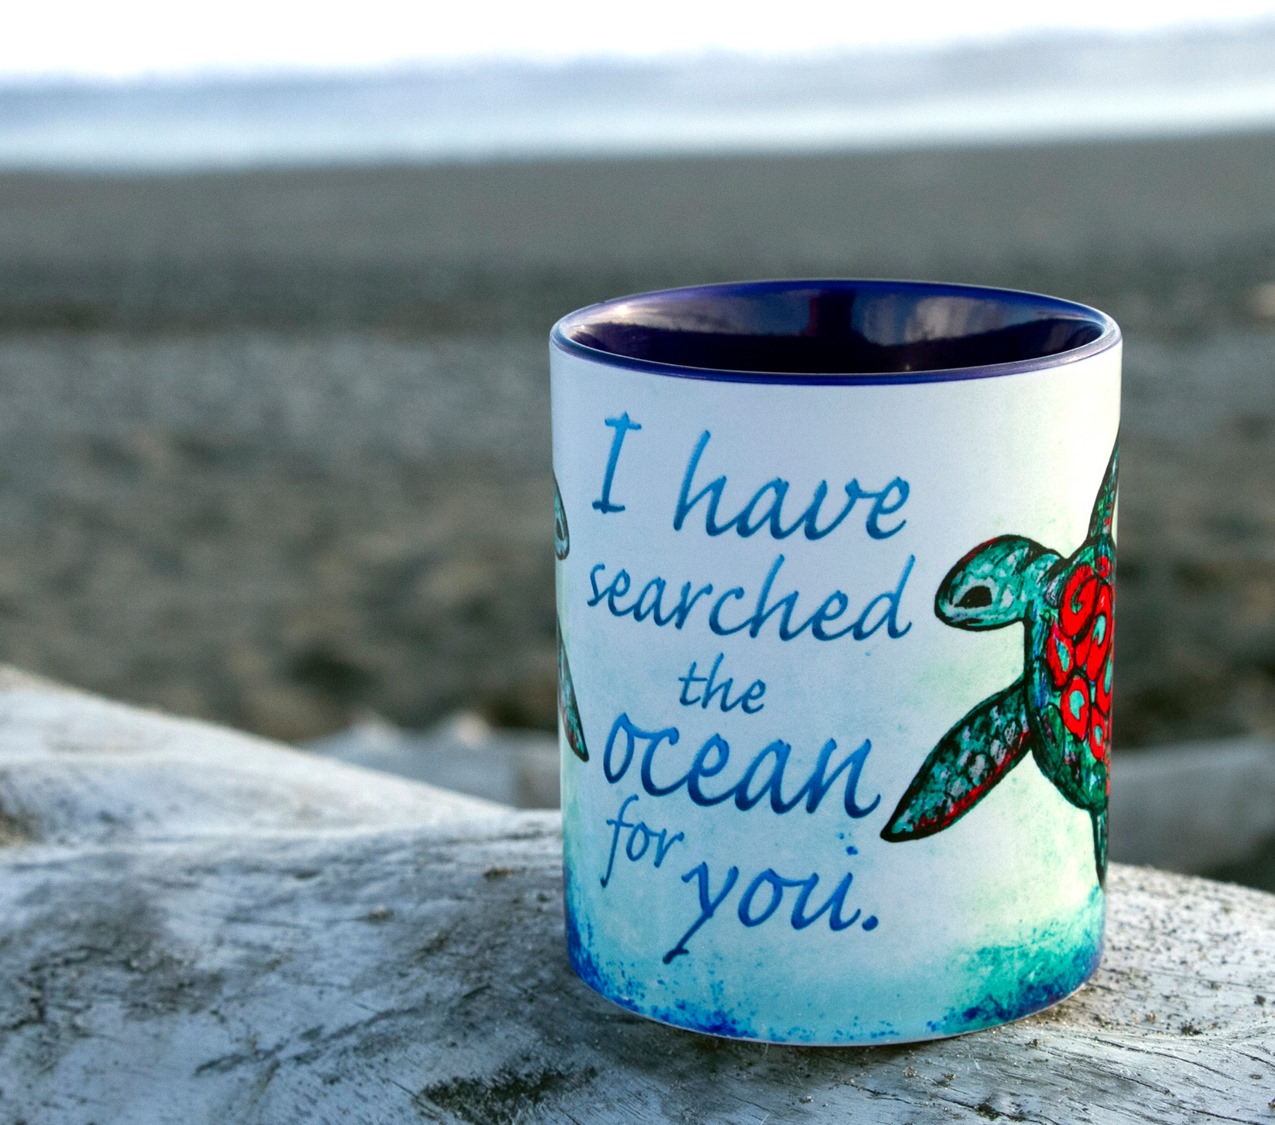 Coffee mug with sea turtle and quote "I have searched the ocean for you." by Pithitude in Brookings, Oregon